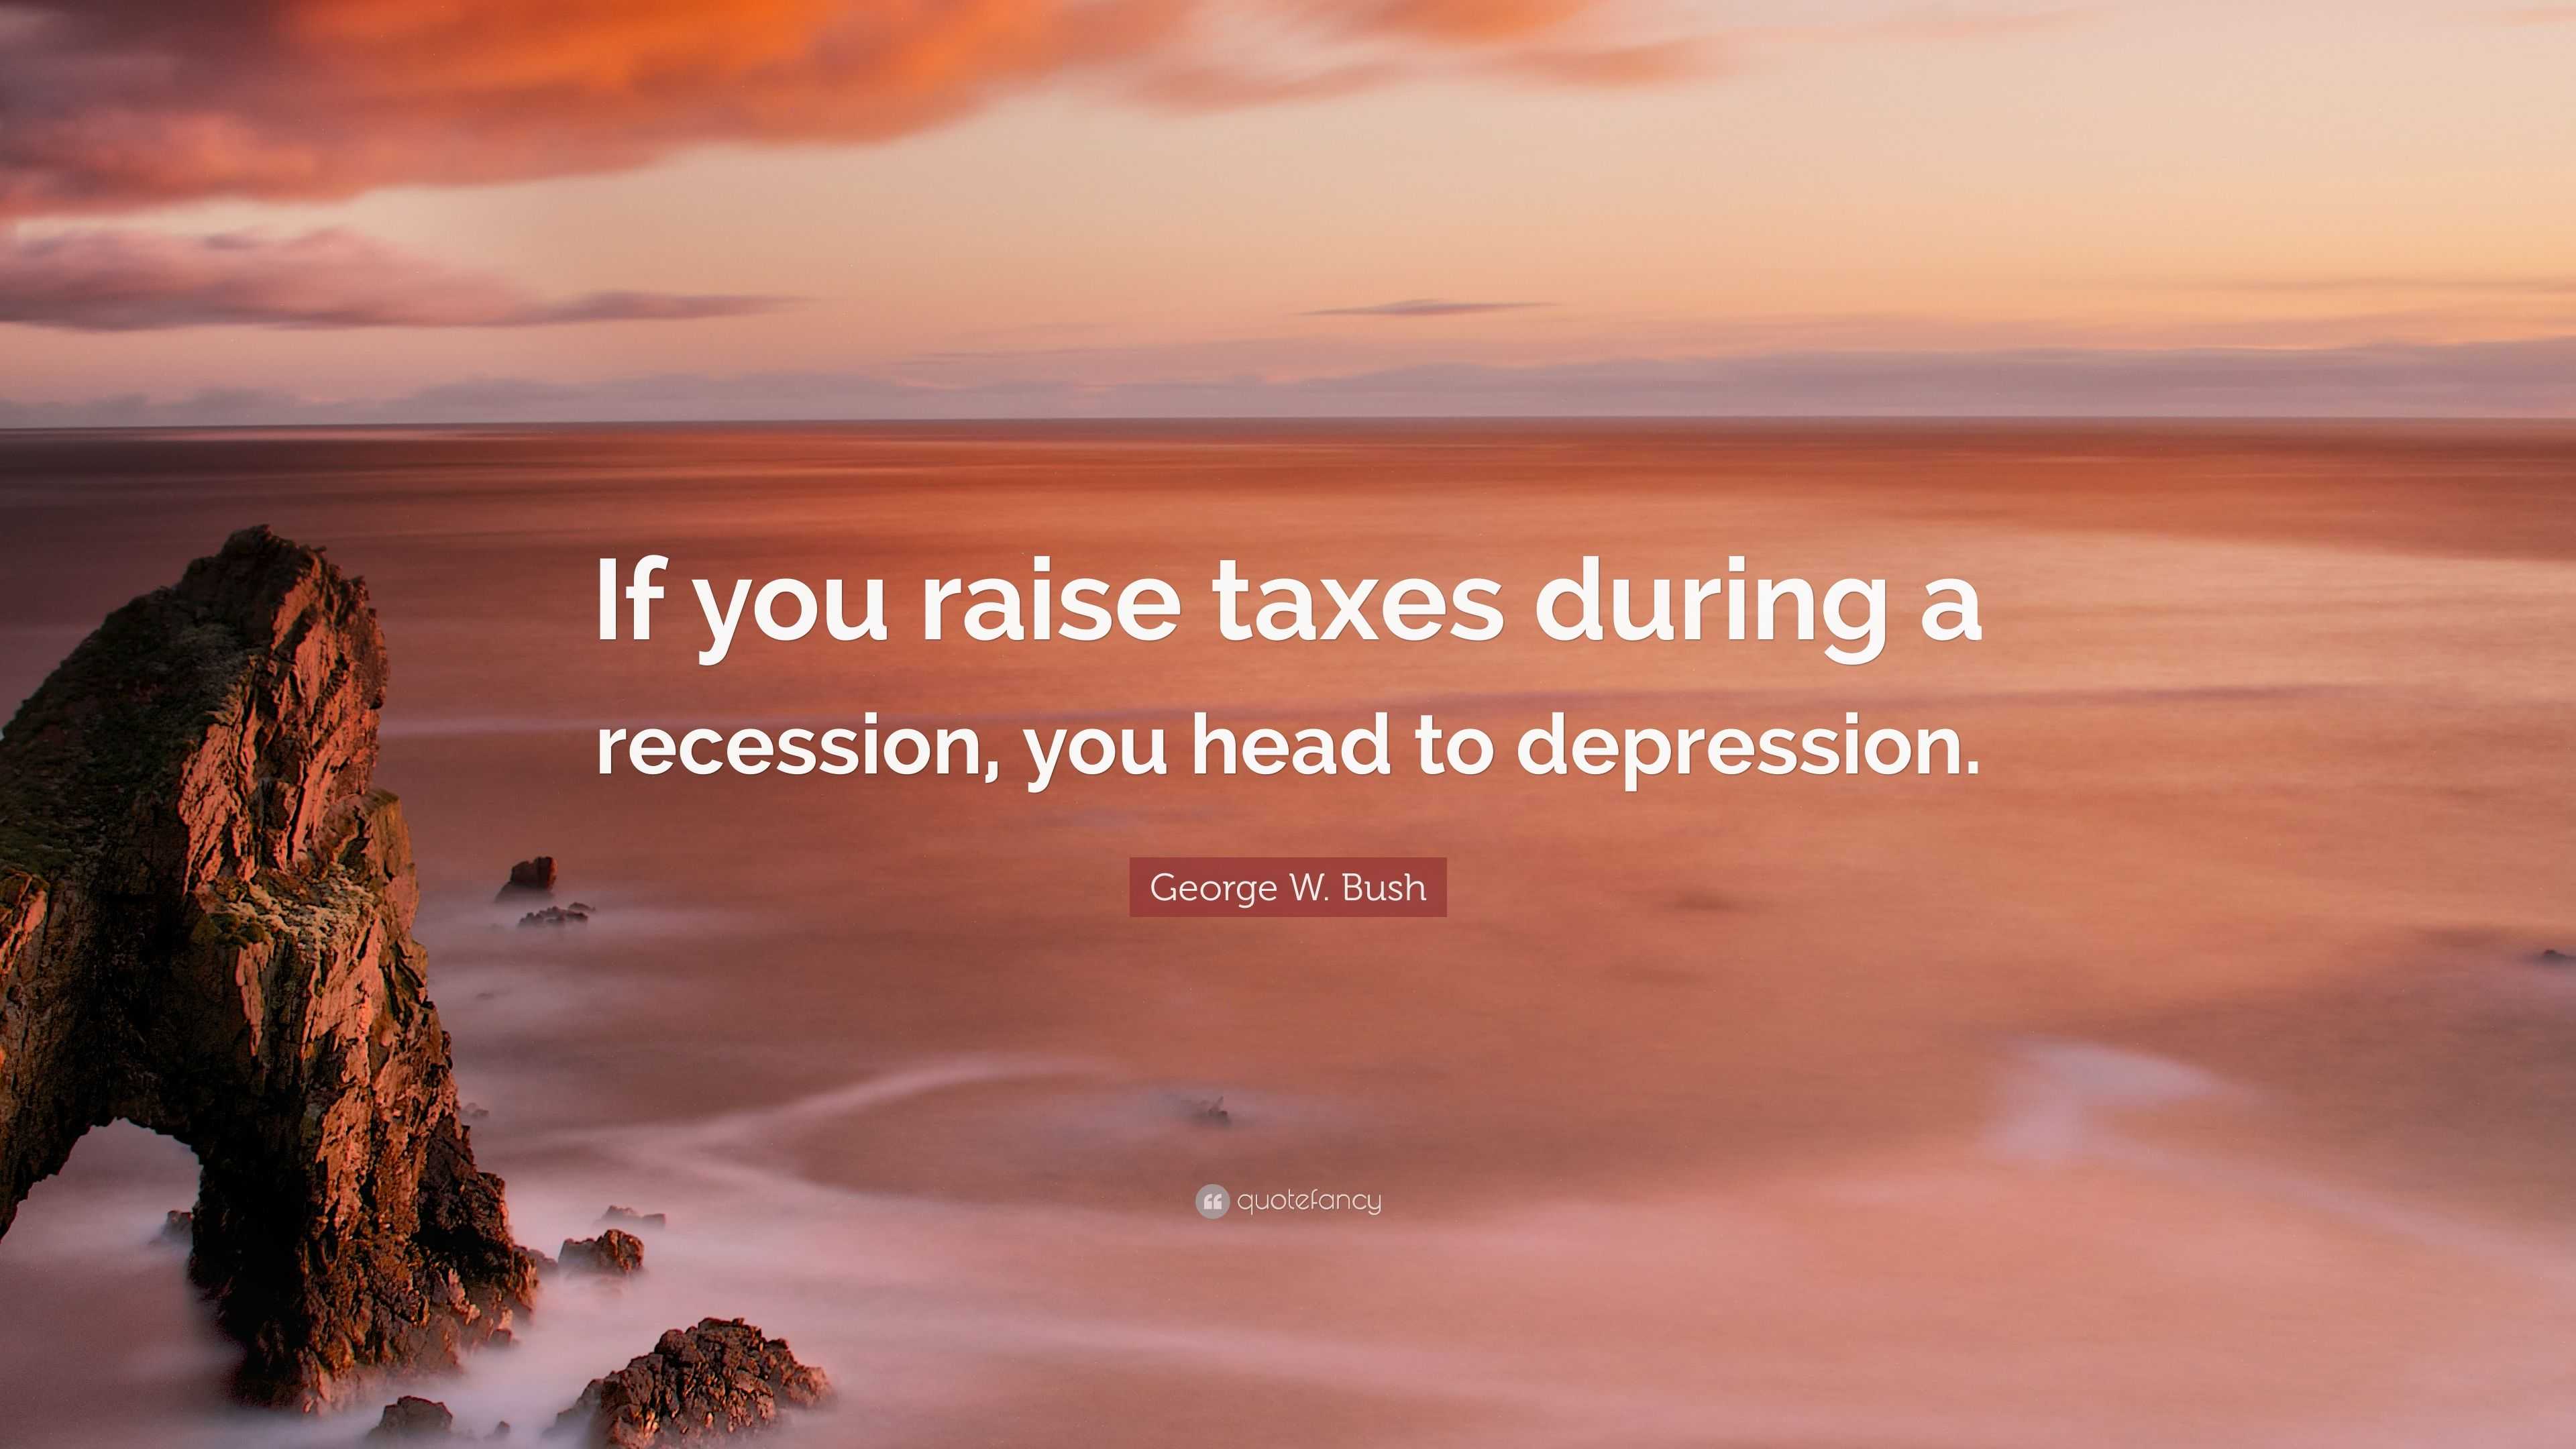 george-w-bush-quote-if-you-raise-taxes-during-a-recession-you-head